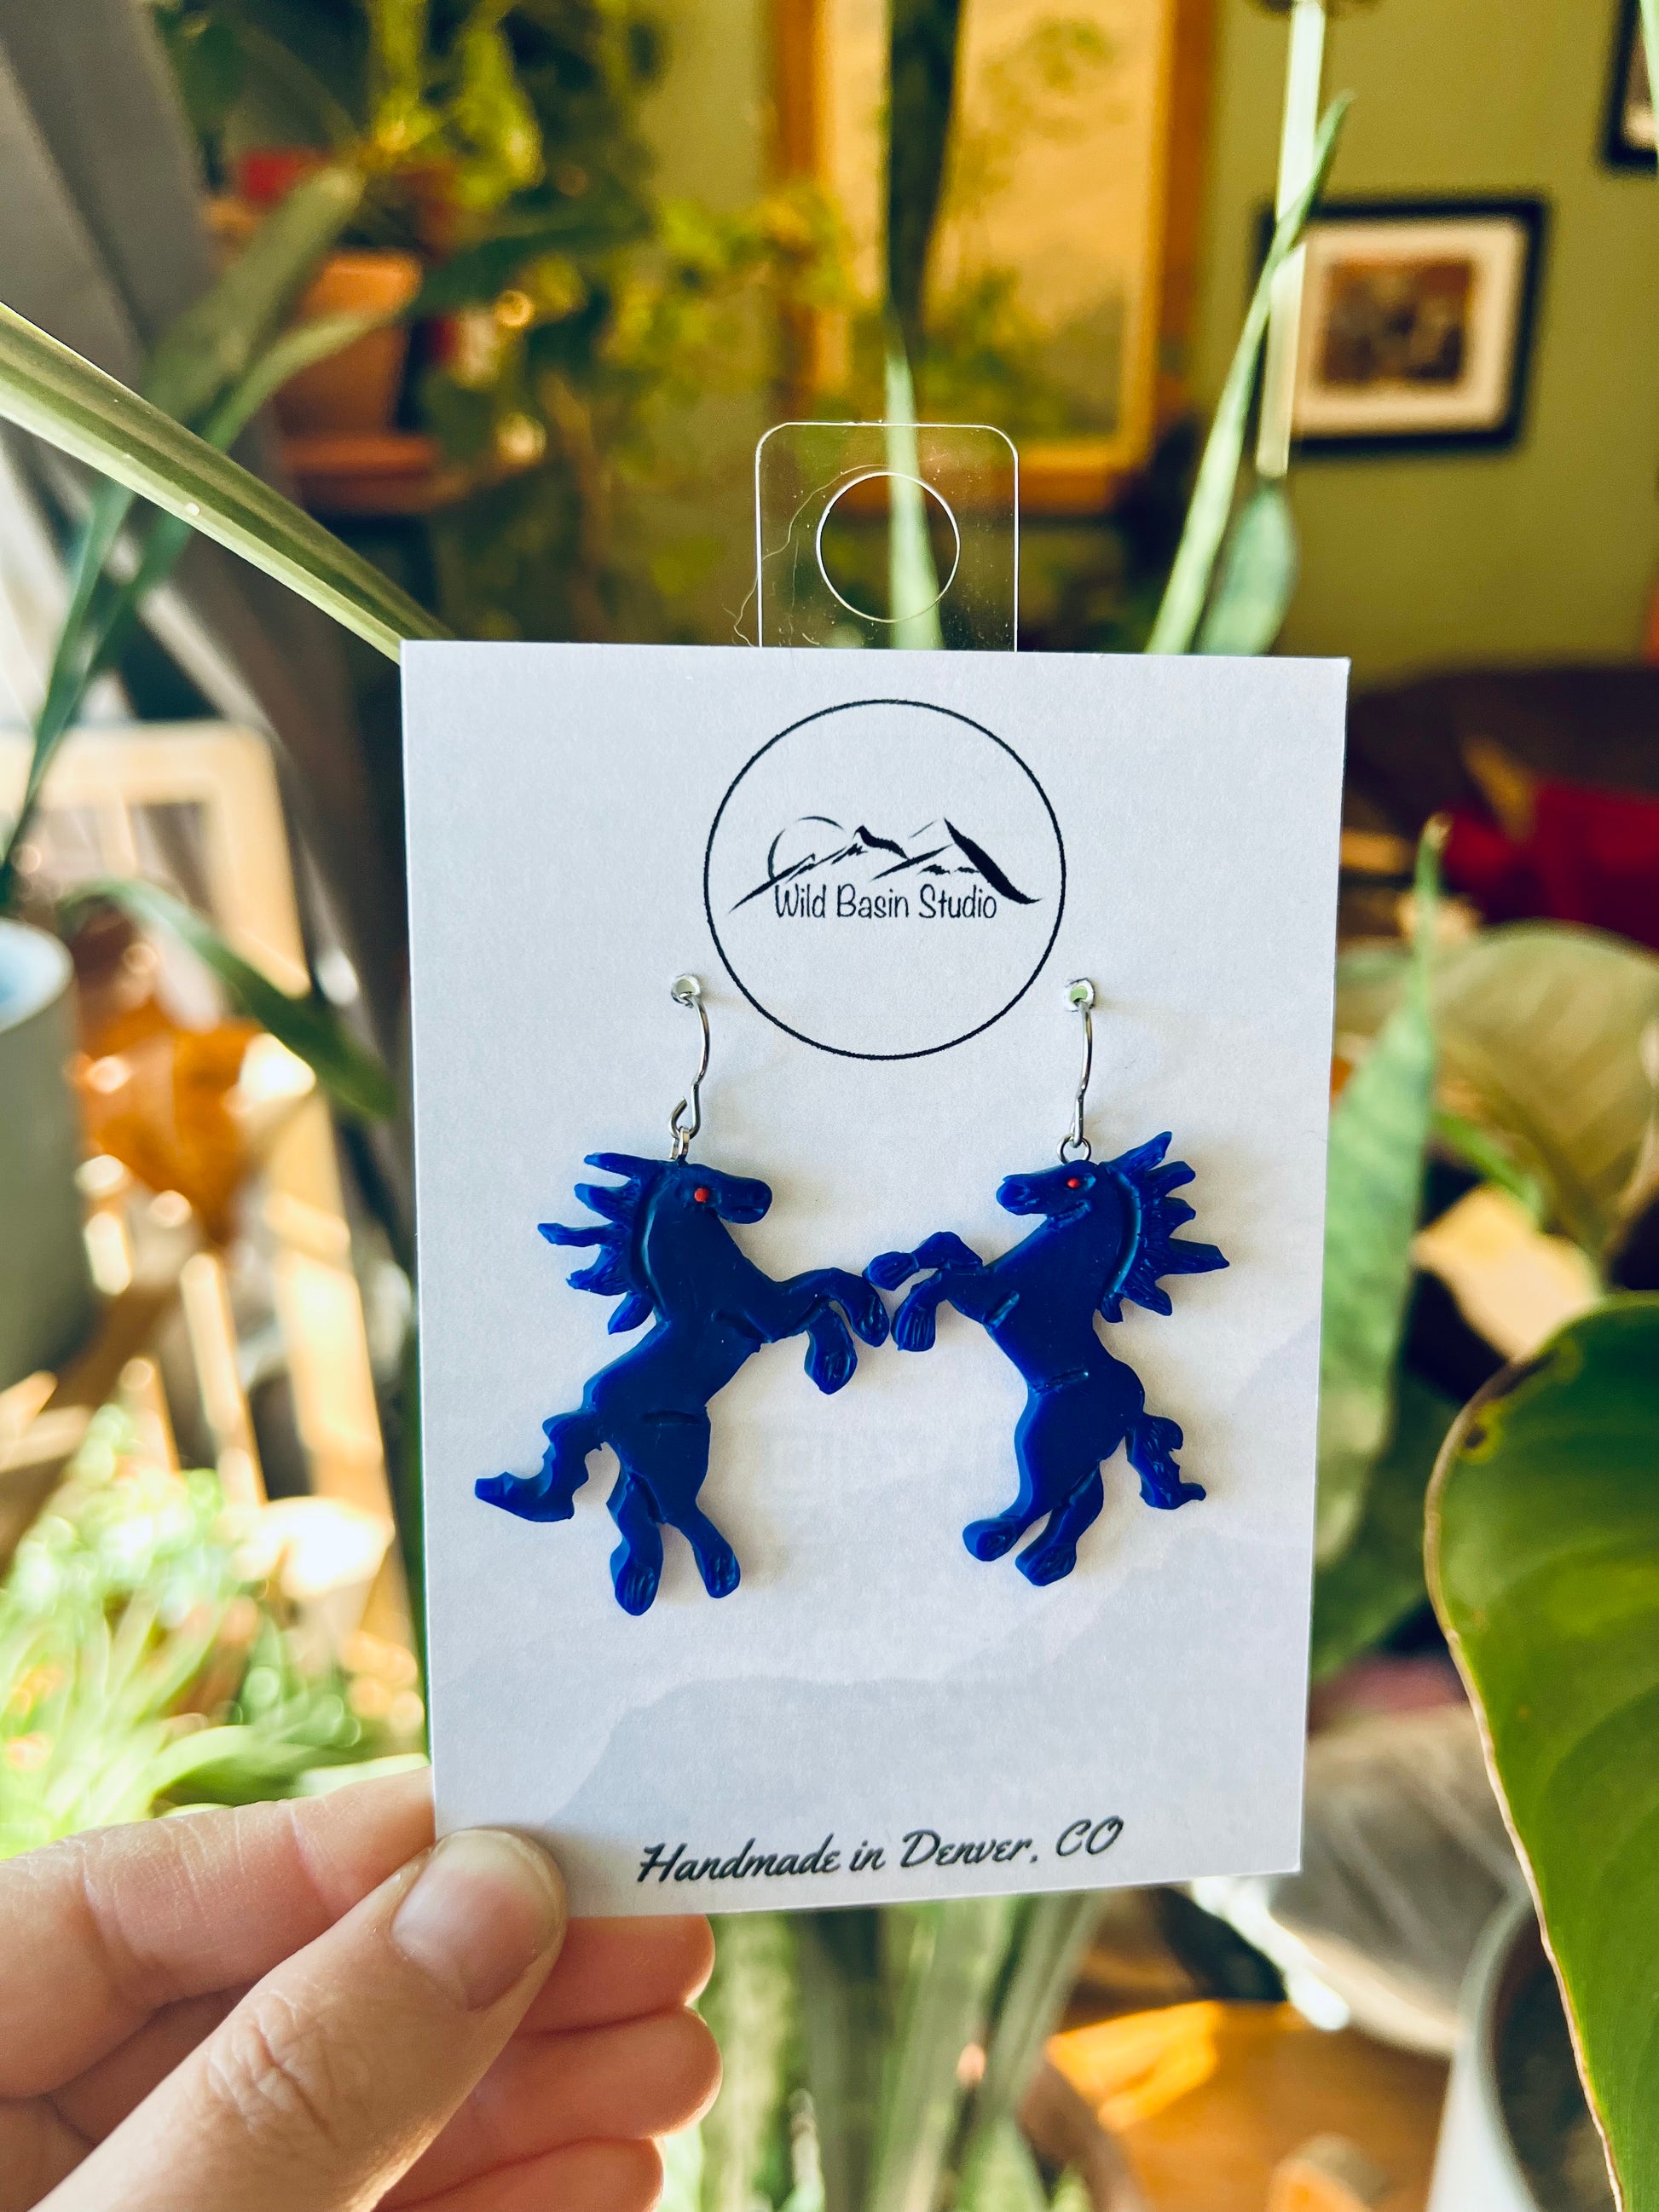 Experience the iconic Blucifer at DIA in a new way with our polymer clay earrings inspired by this Denver landmark. These artisan-crafted earrings capture the spirit of the Blue Mustang, adding a touch of local charm to your style. Show off your Mile High pride with these unique statement pieces!